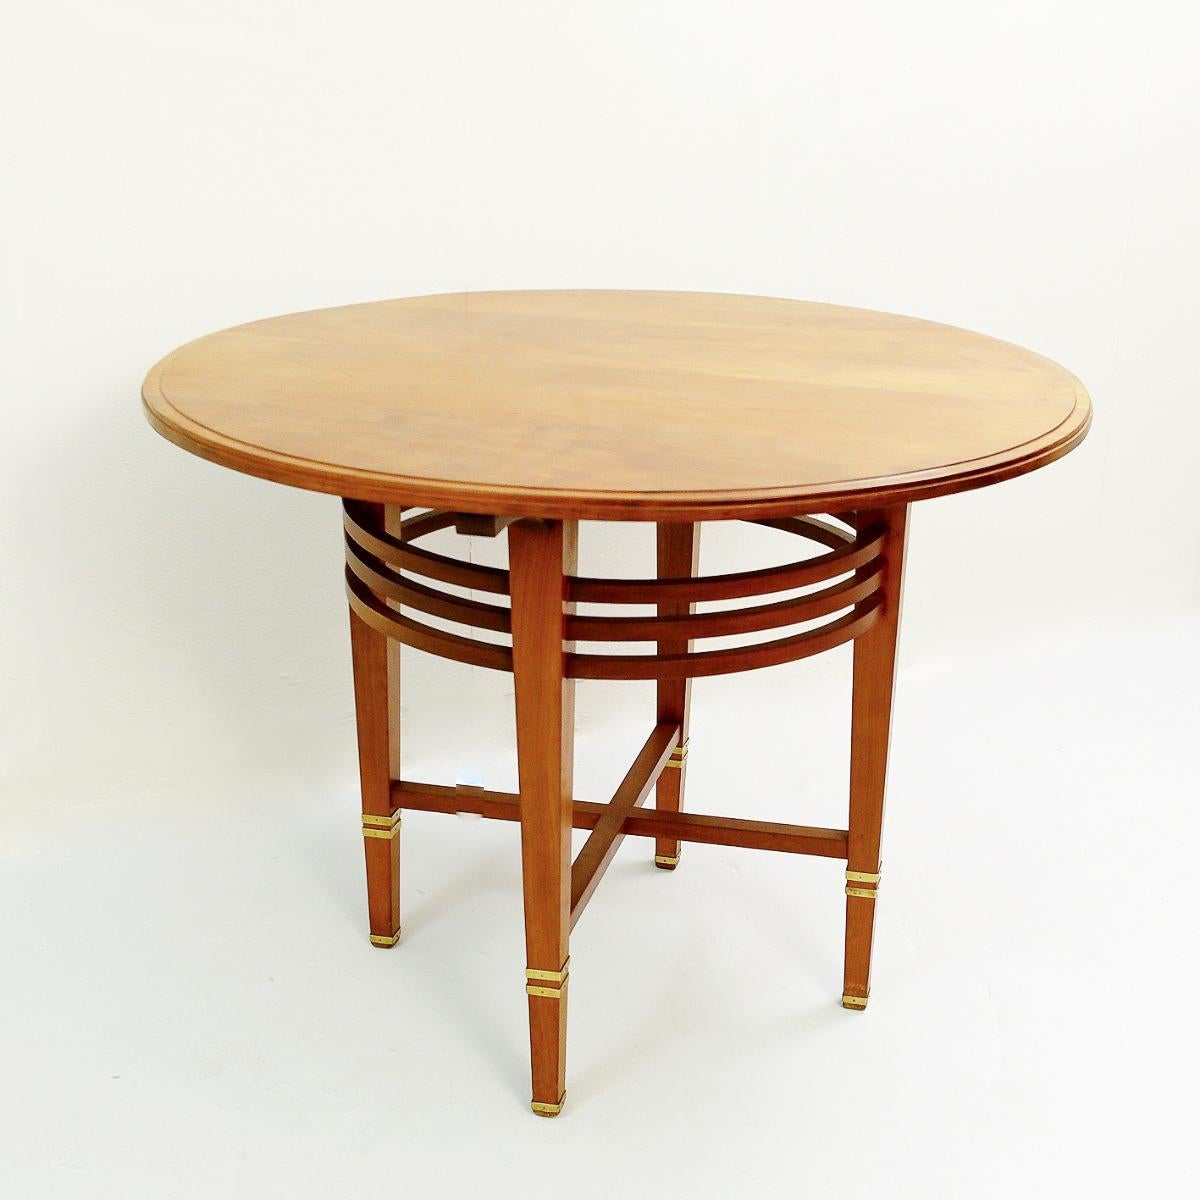 Belgian Liszt Table by Gustave Serrurier Bovy, Mahogany and Brass, 1900s For Sale